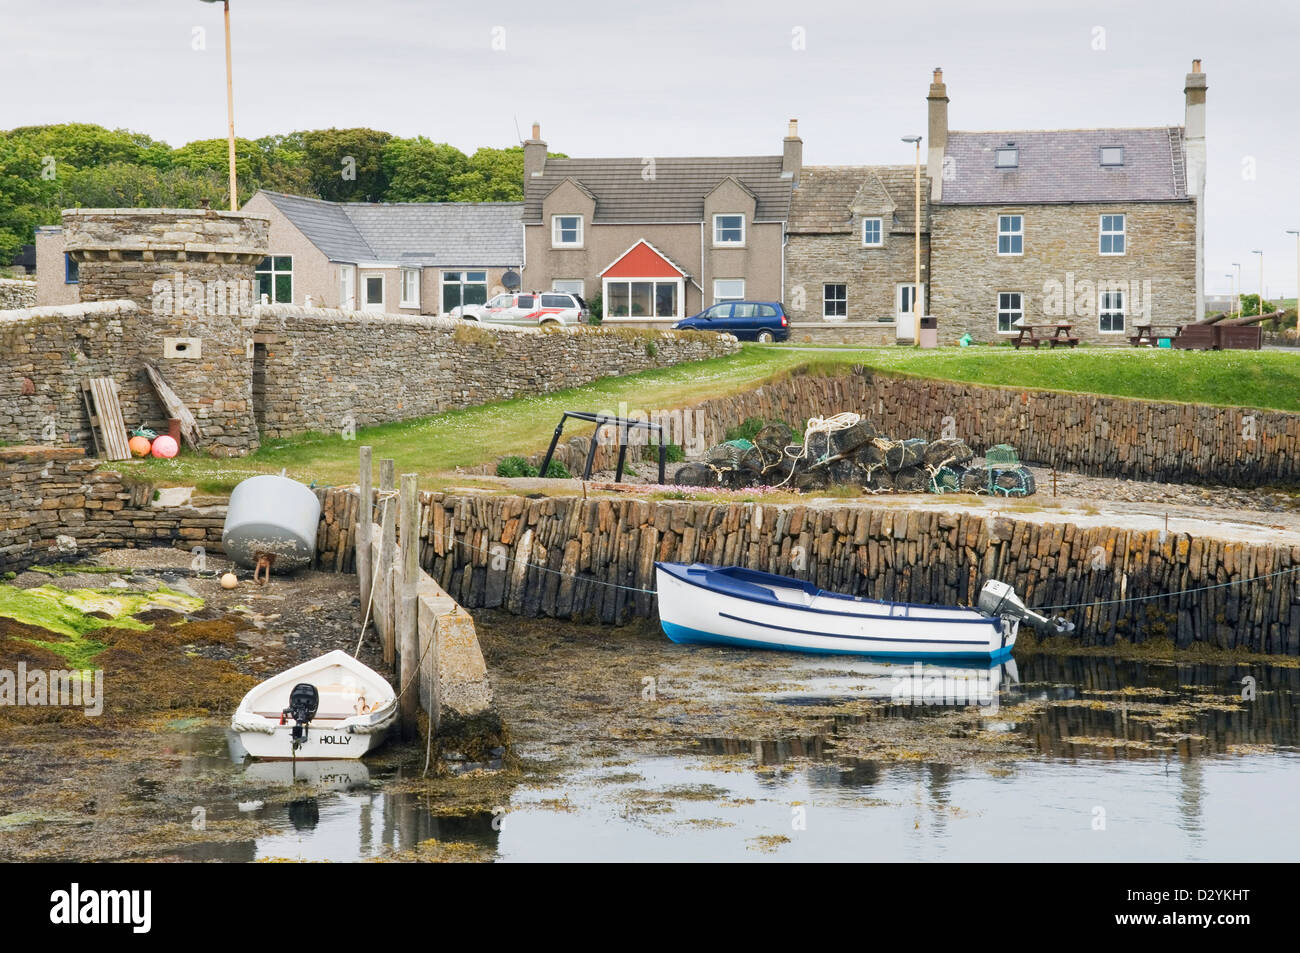 Balfour Village on the island of Shapinsay, Orkney Islands, Scotland. Stock Photo